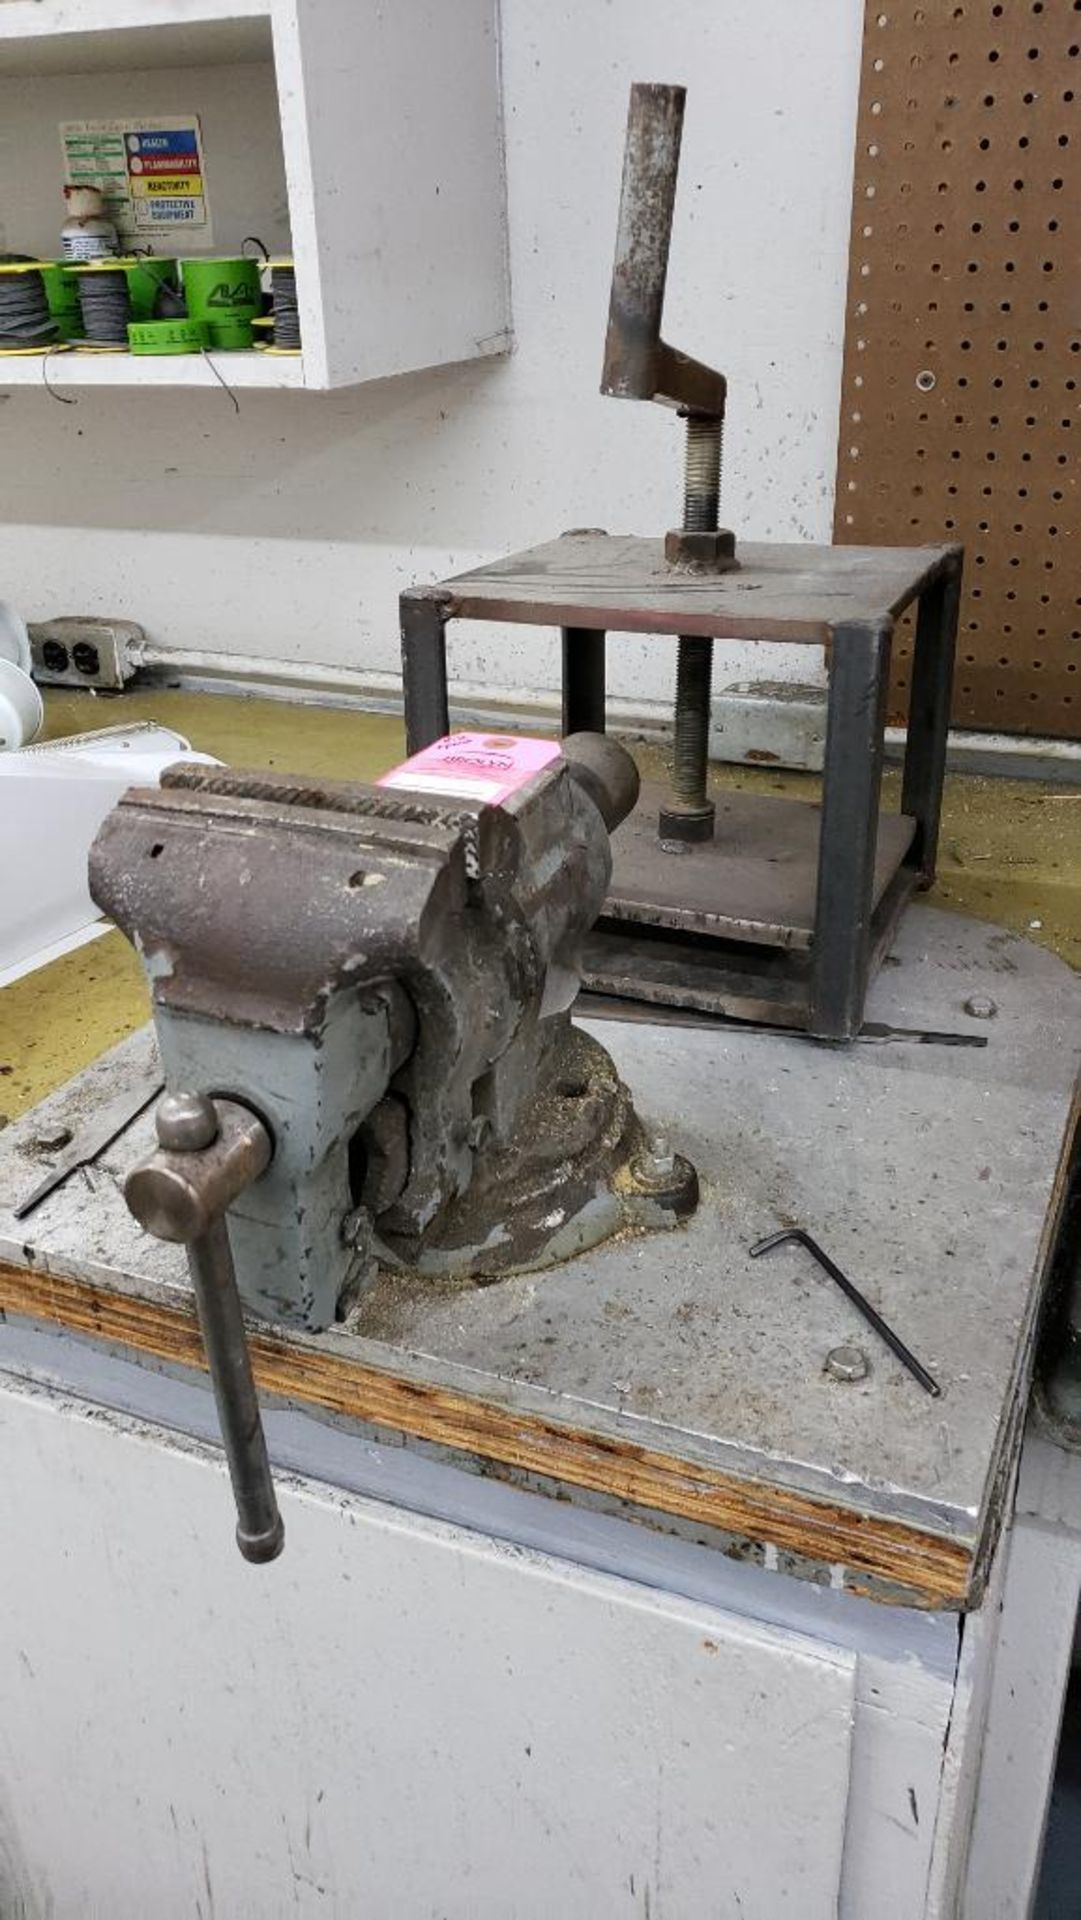 Bench vise and clamp press.